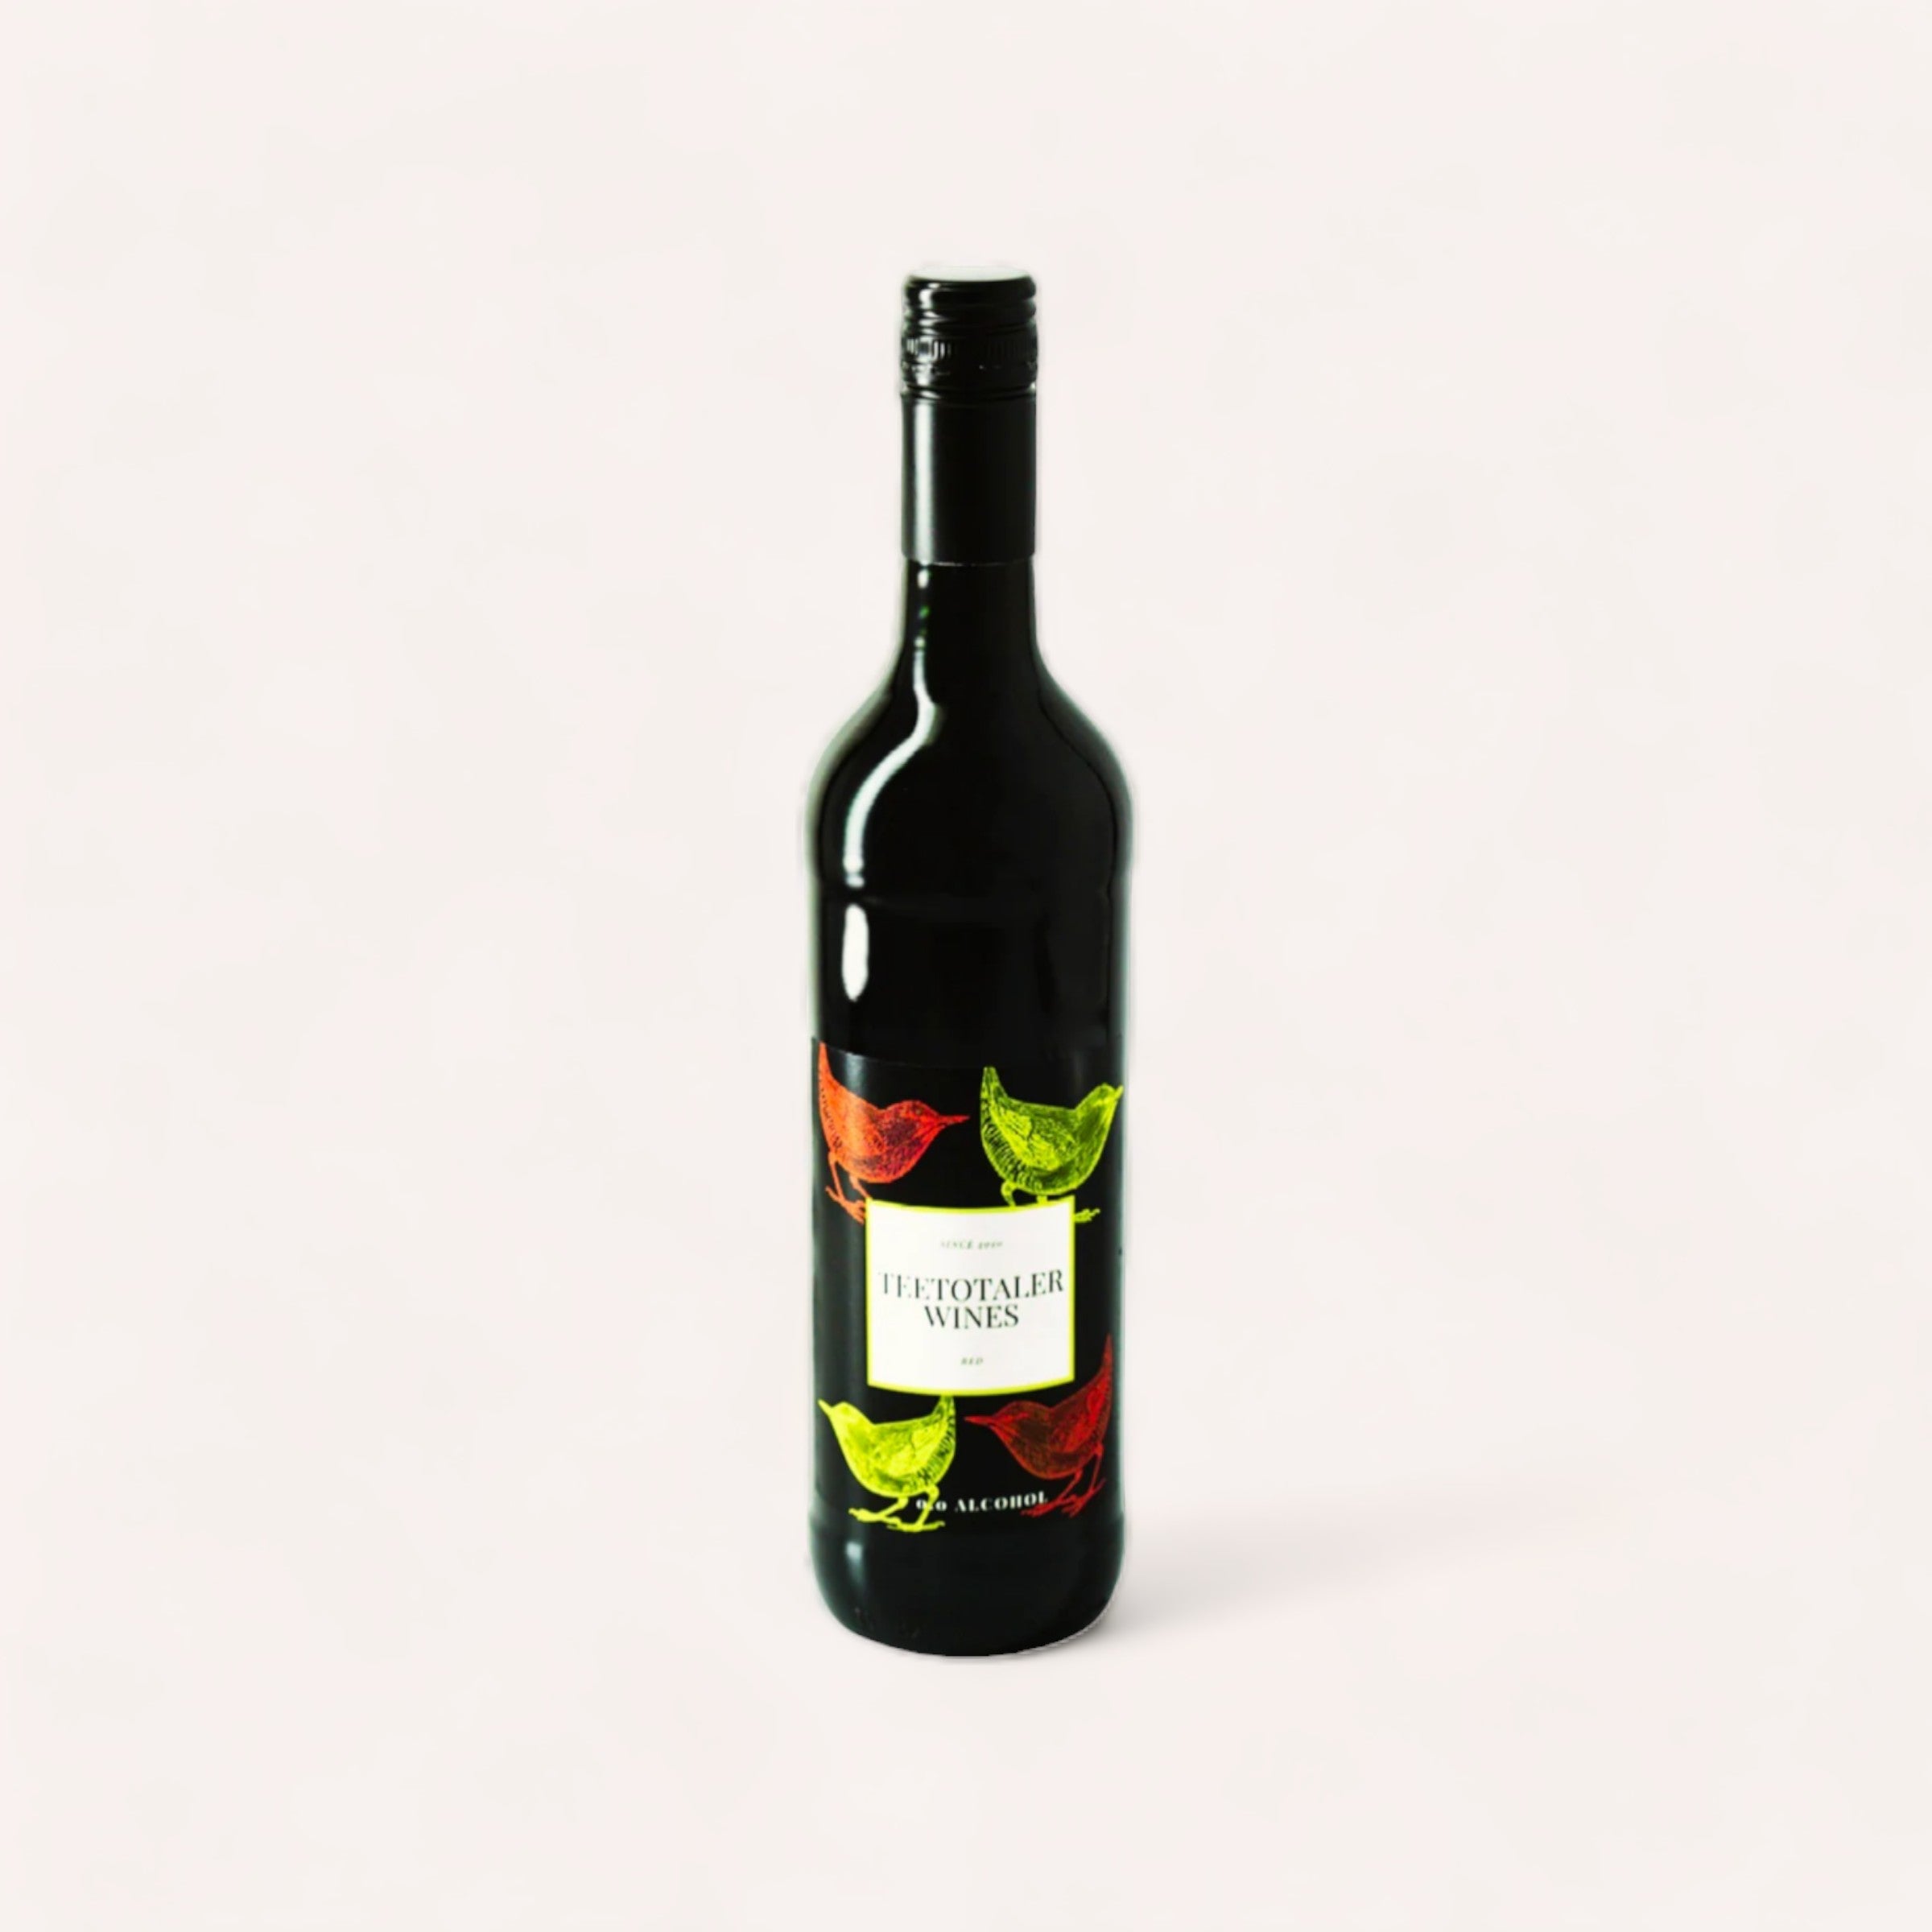 A bottle of Red Wine by Teetotaler, zero alcohol wine with a vibrant label featuring colorful leaves against a plain background.